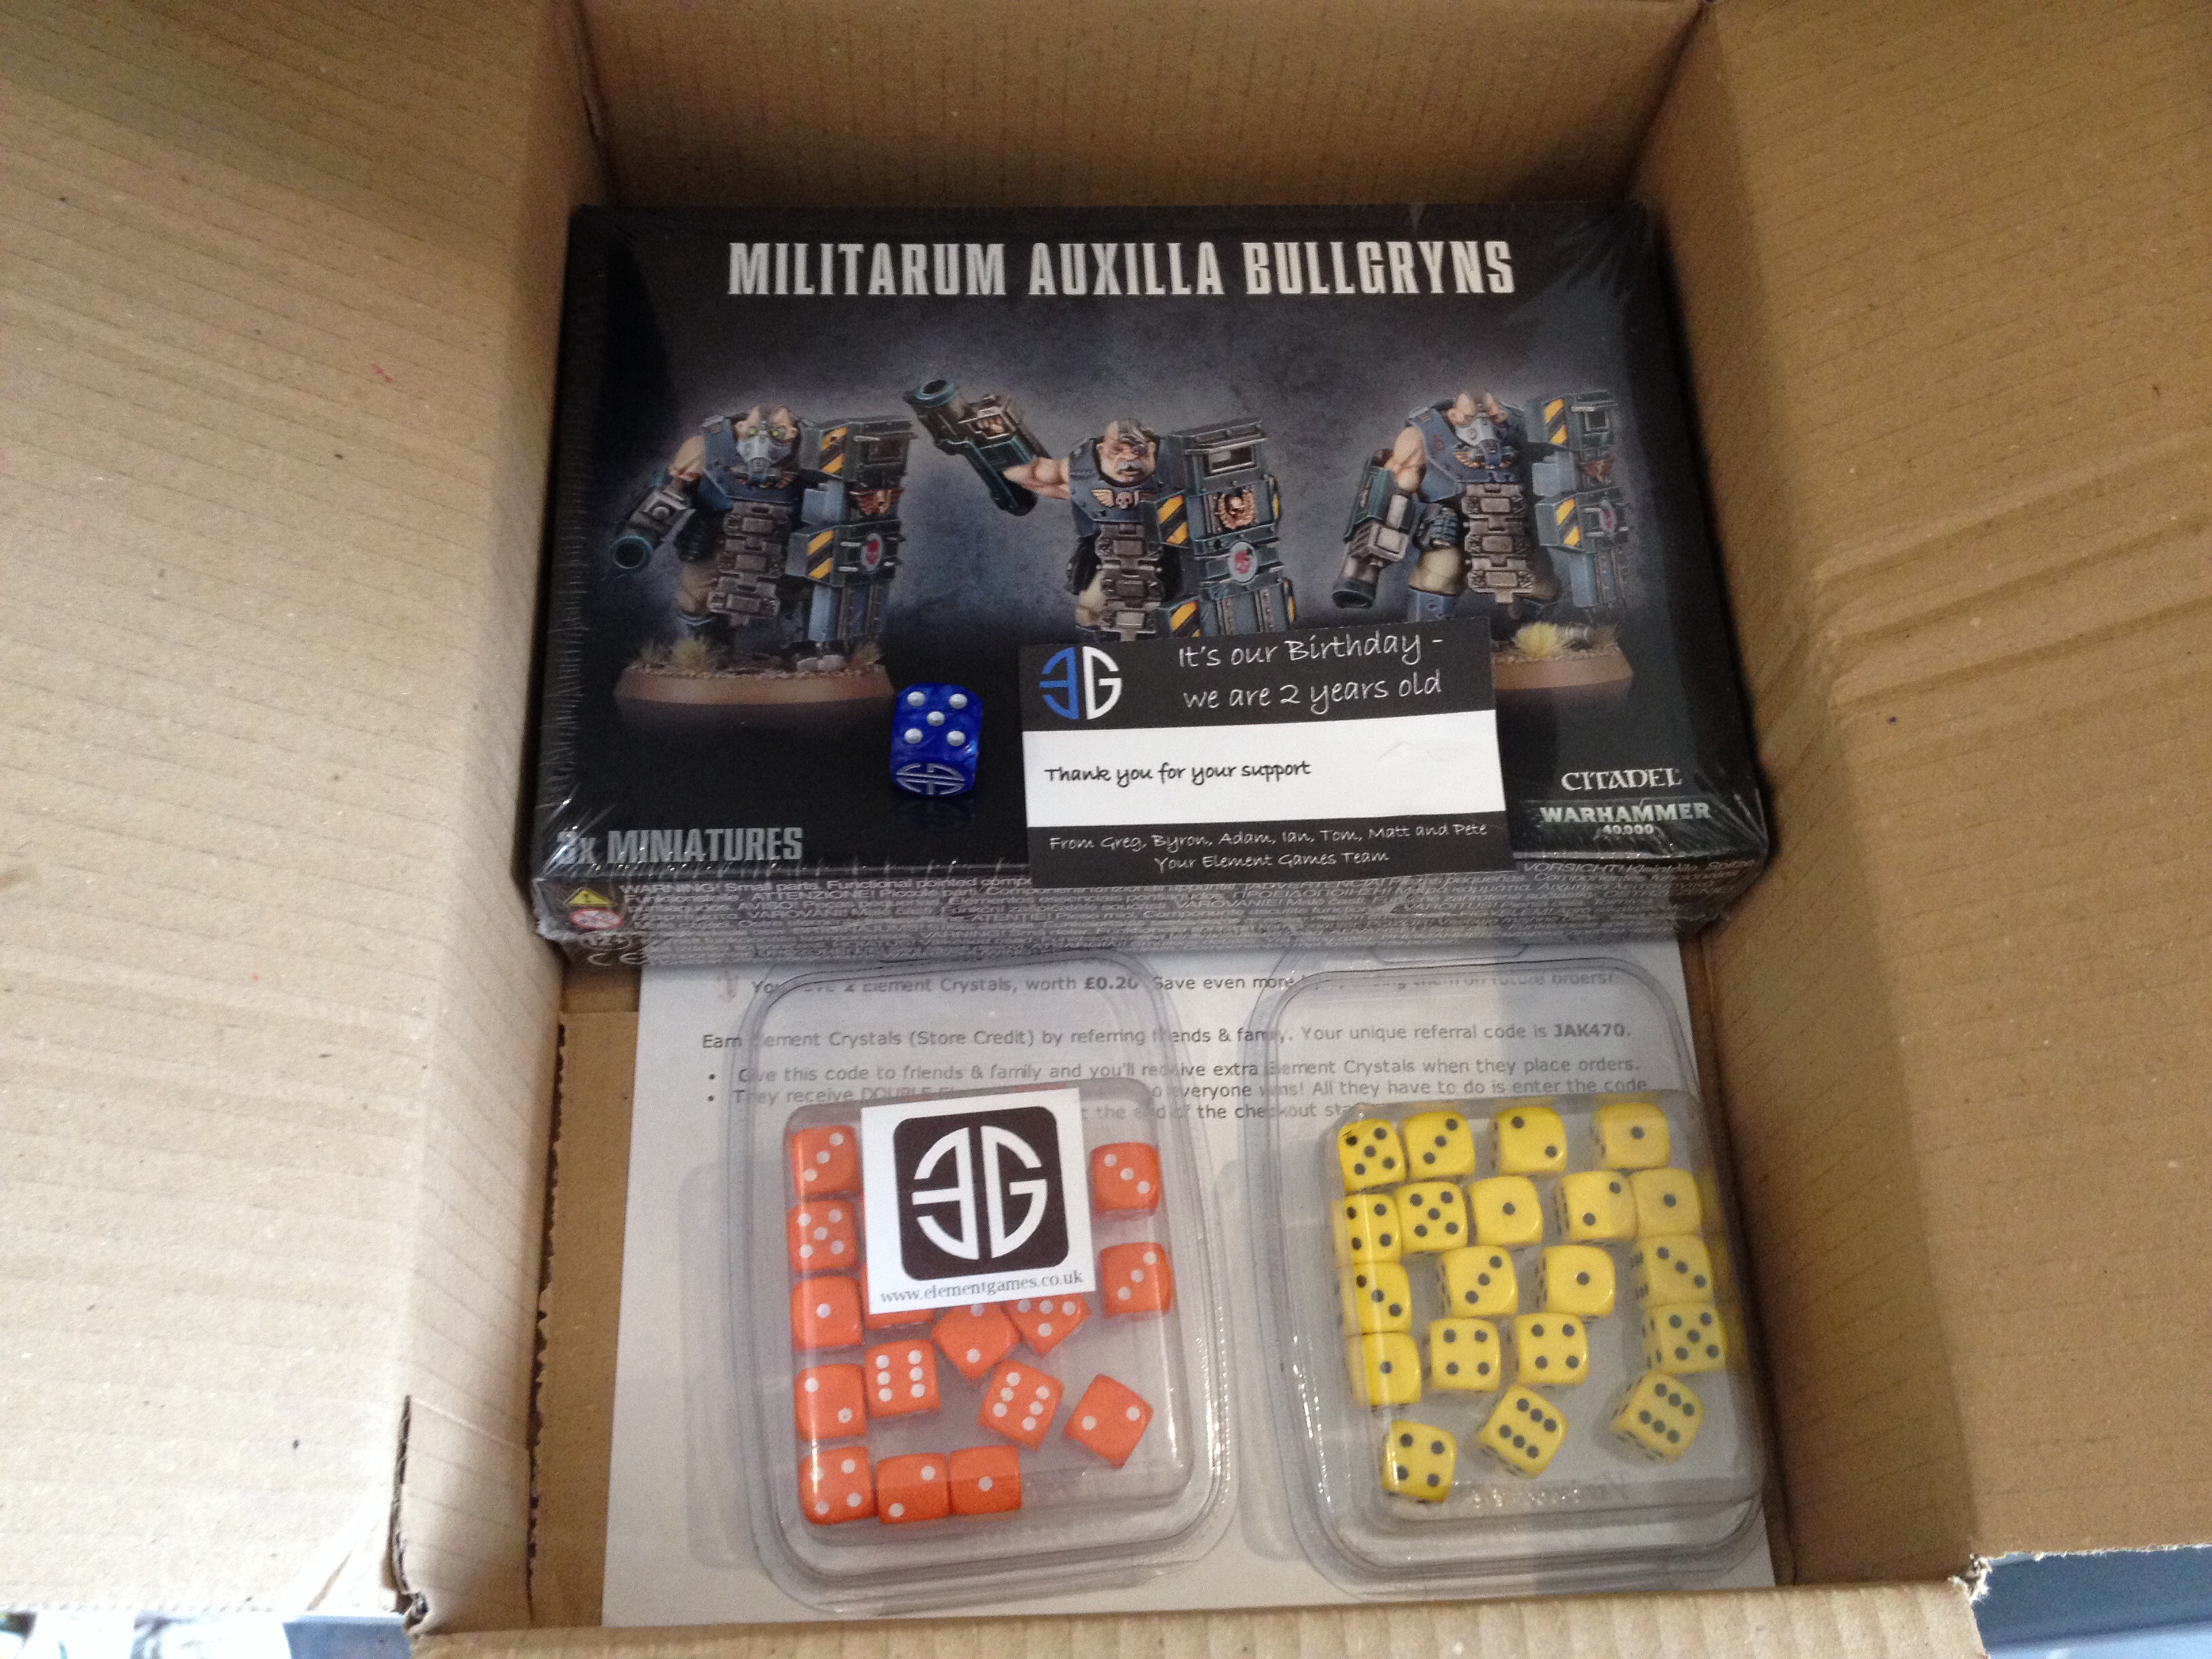 Start Collecting! Astra Militarum   - Miniatures Collectors  Guide